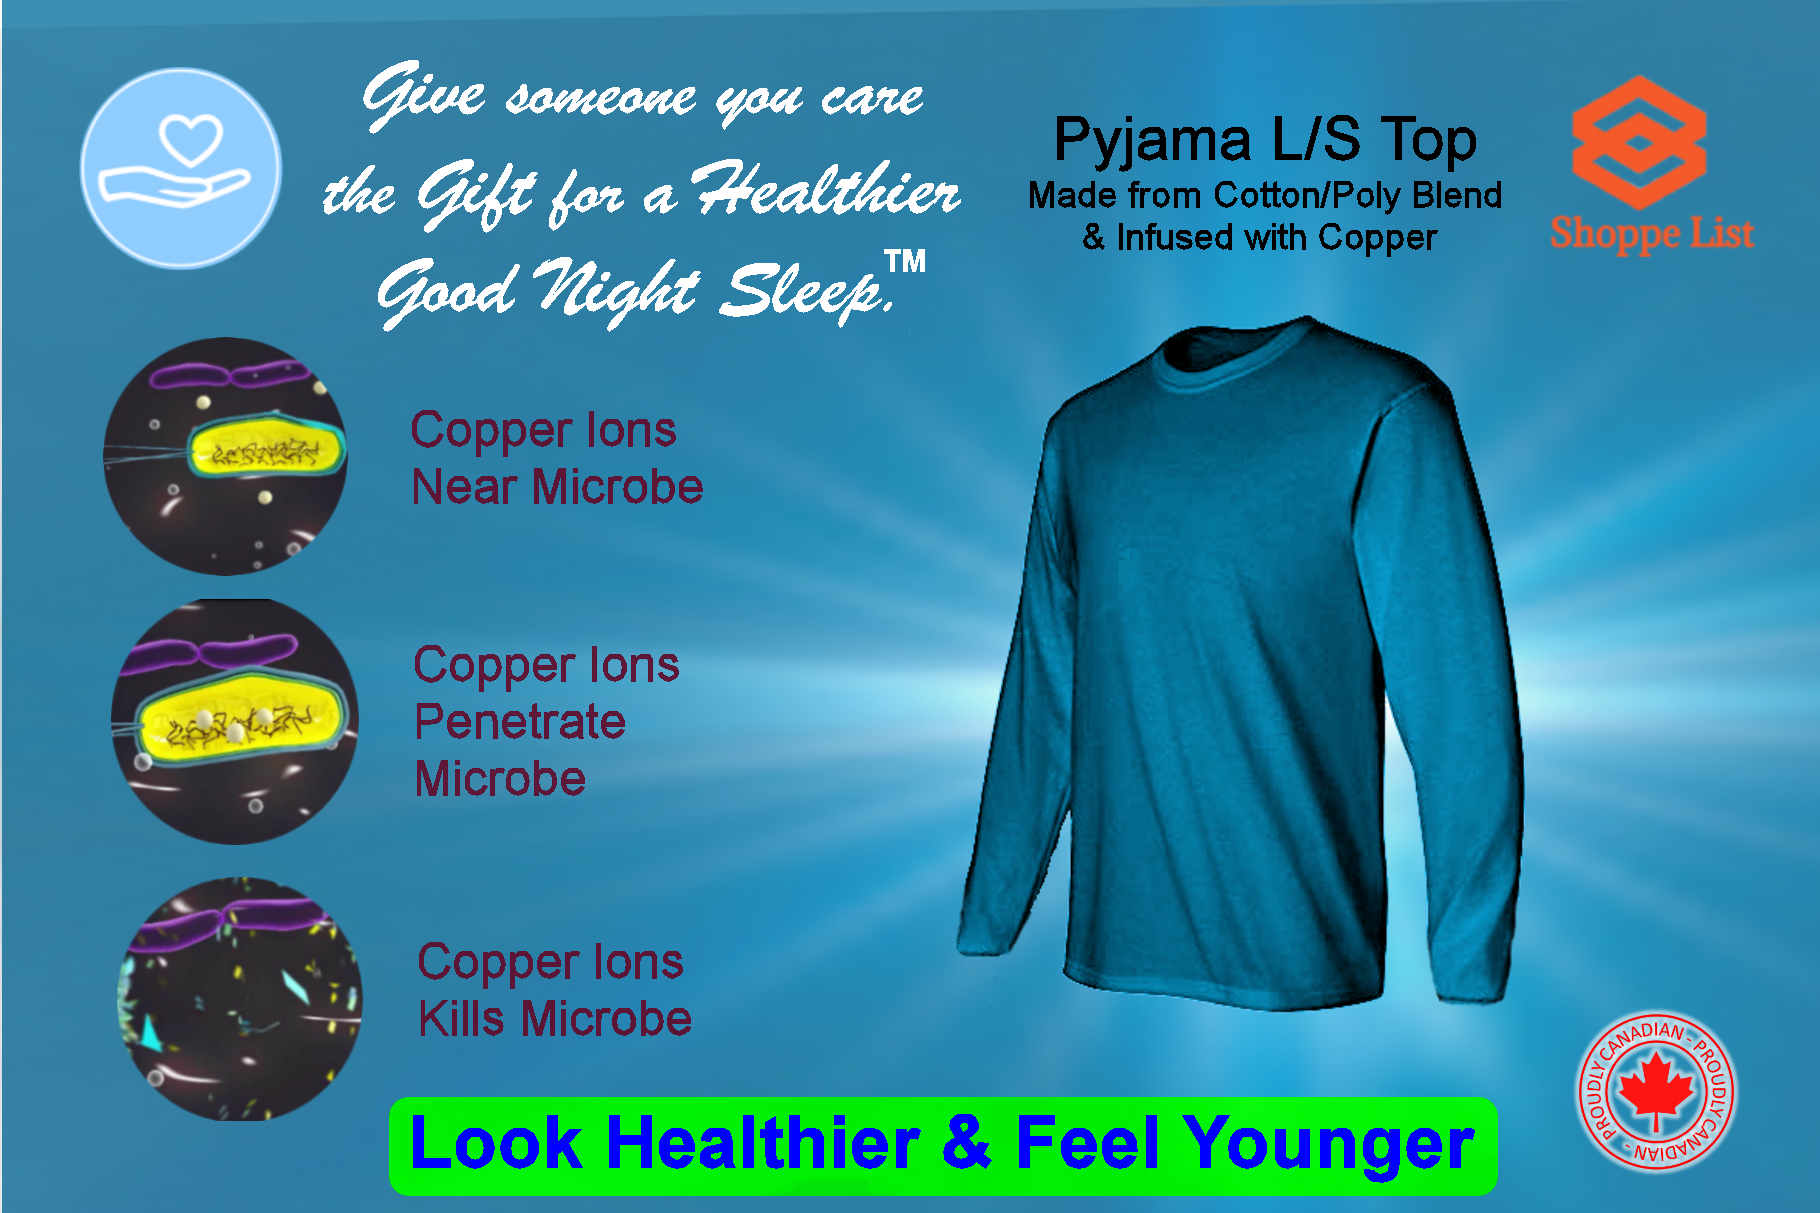 MyDream-Pyjama Long Sleeve T-shirt Infused with Copper Ions.  Limited time offer. - shoppe list